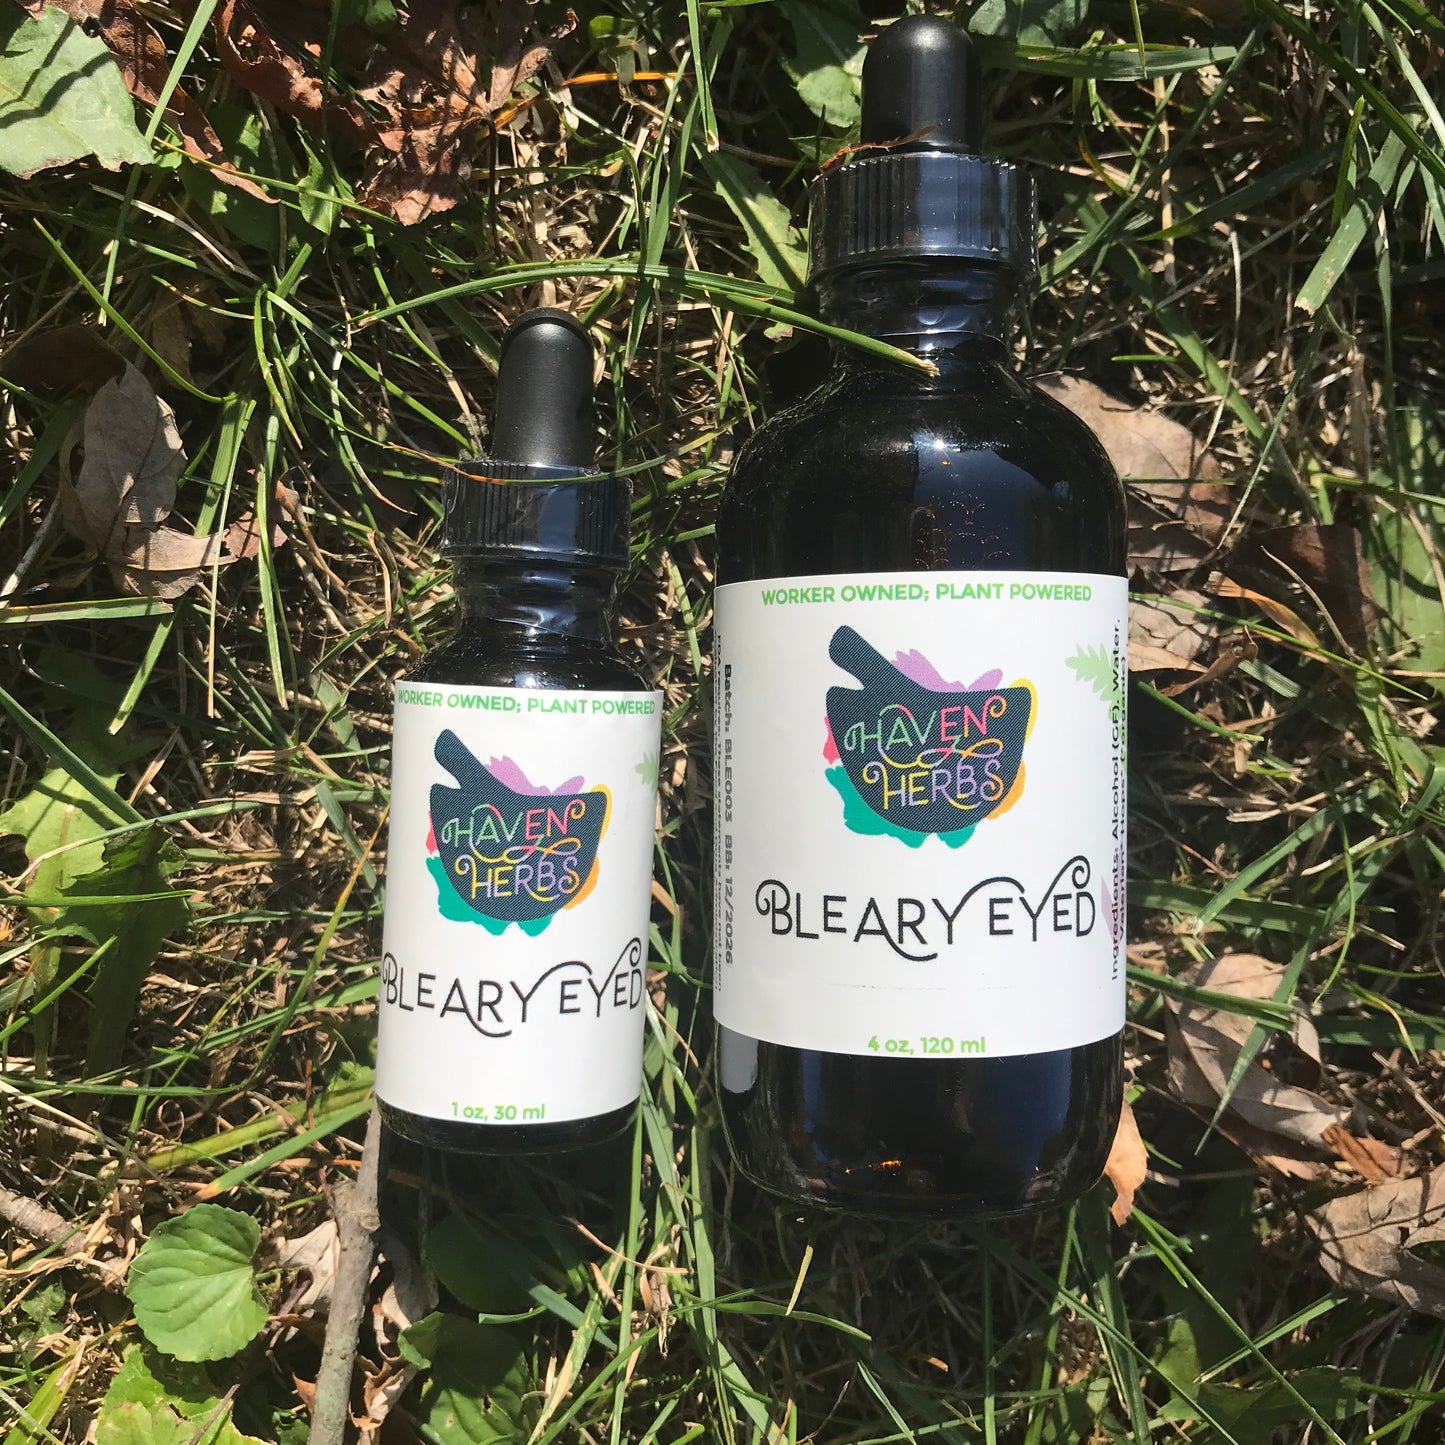 1 and 4 oz bottles of Bleary Eyed on a grass background